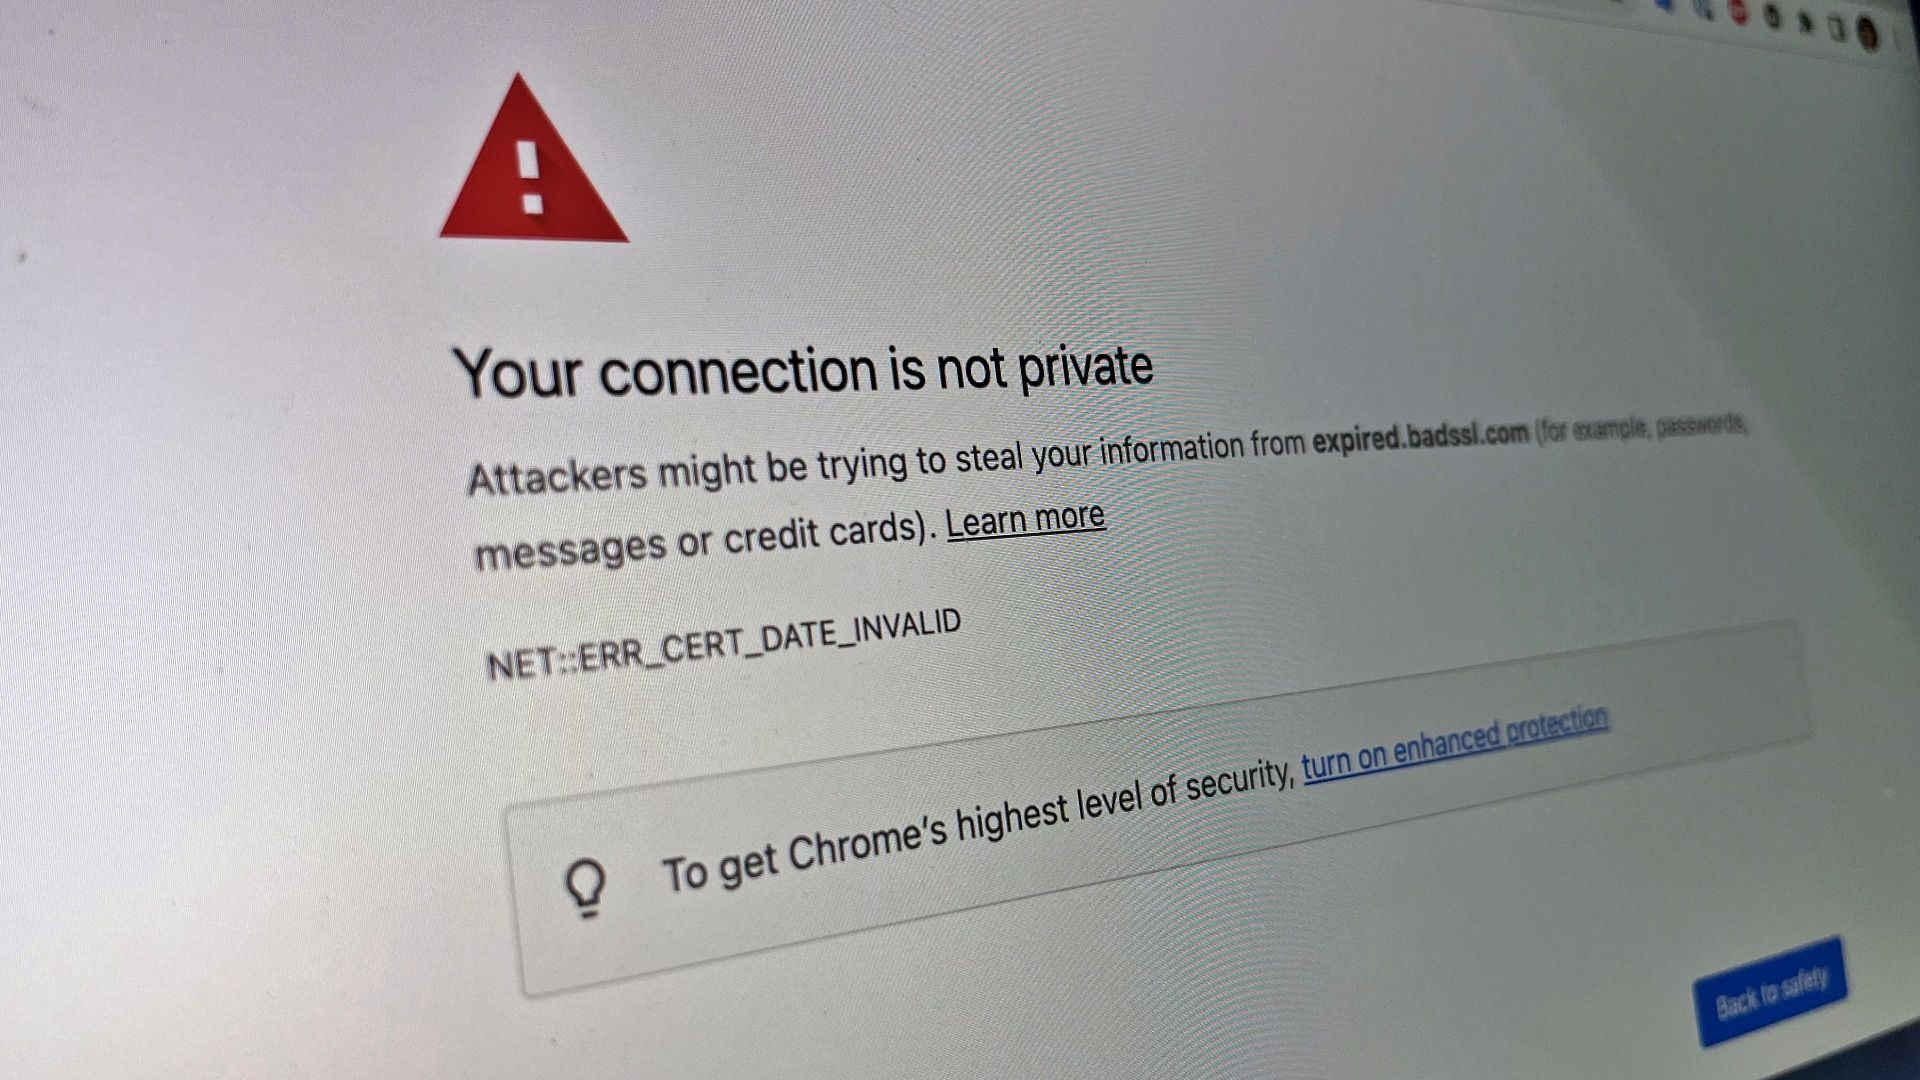 Your connection is not private warning